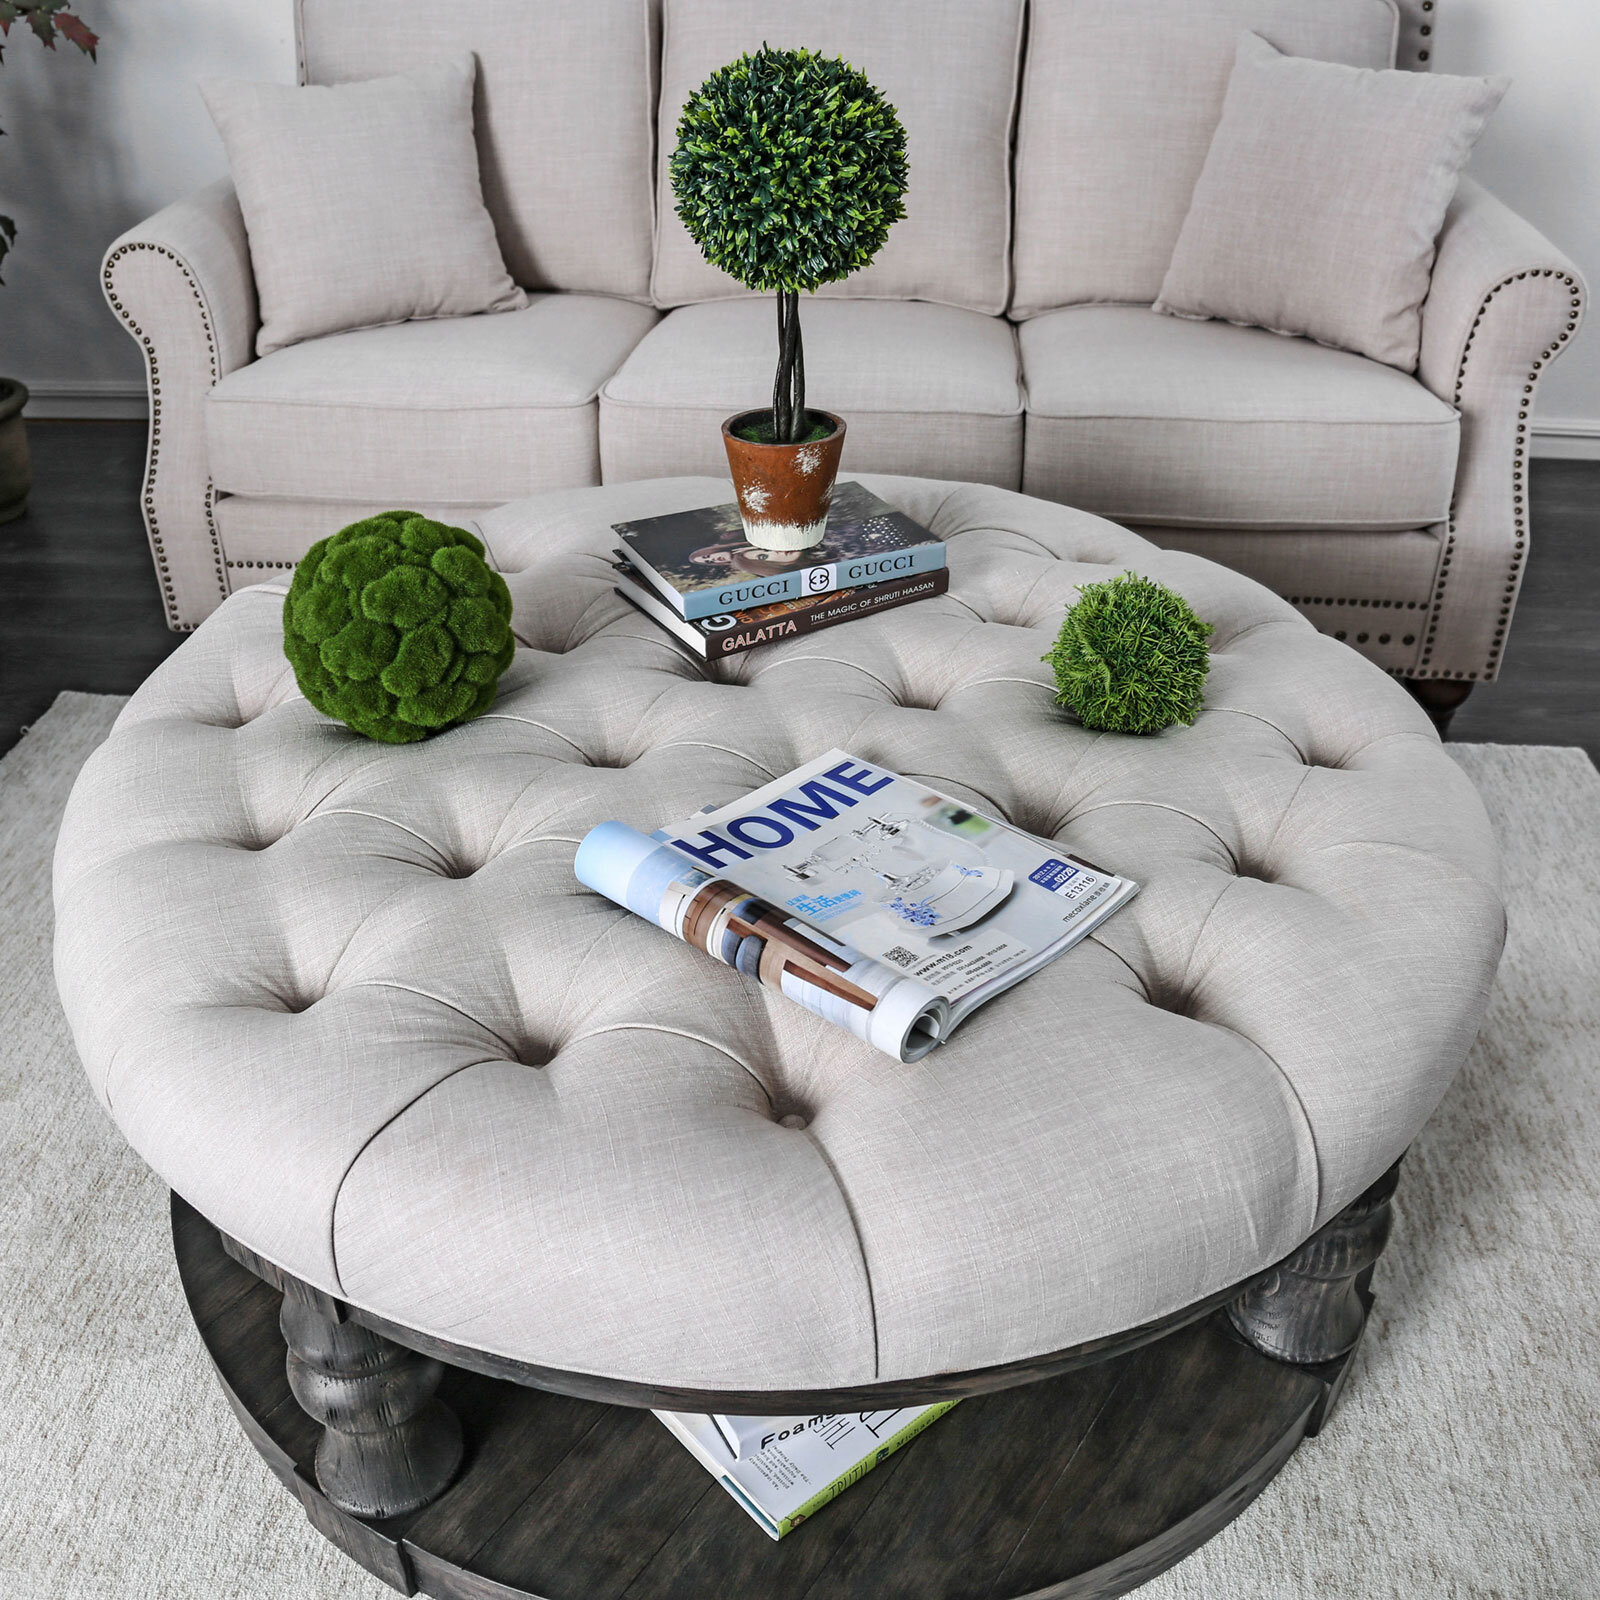 Large Round Tufted Ottoman Coffee Table / Best Ottoman Coffee Tables